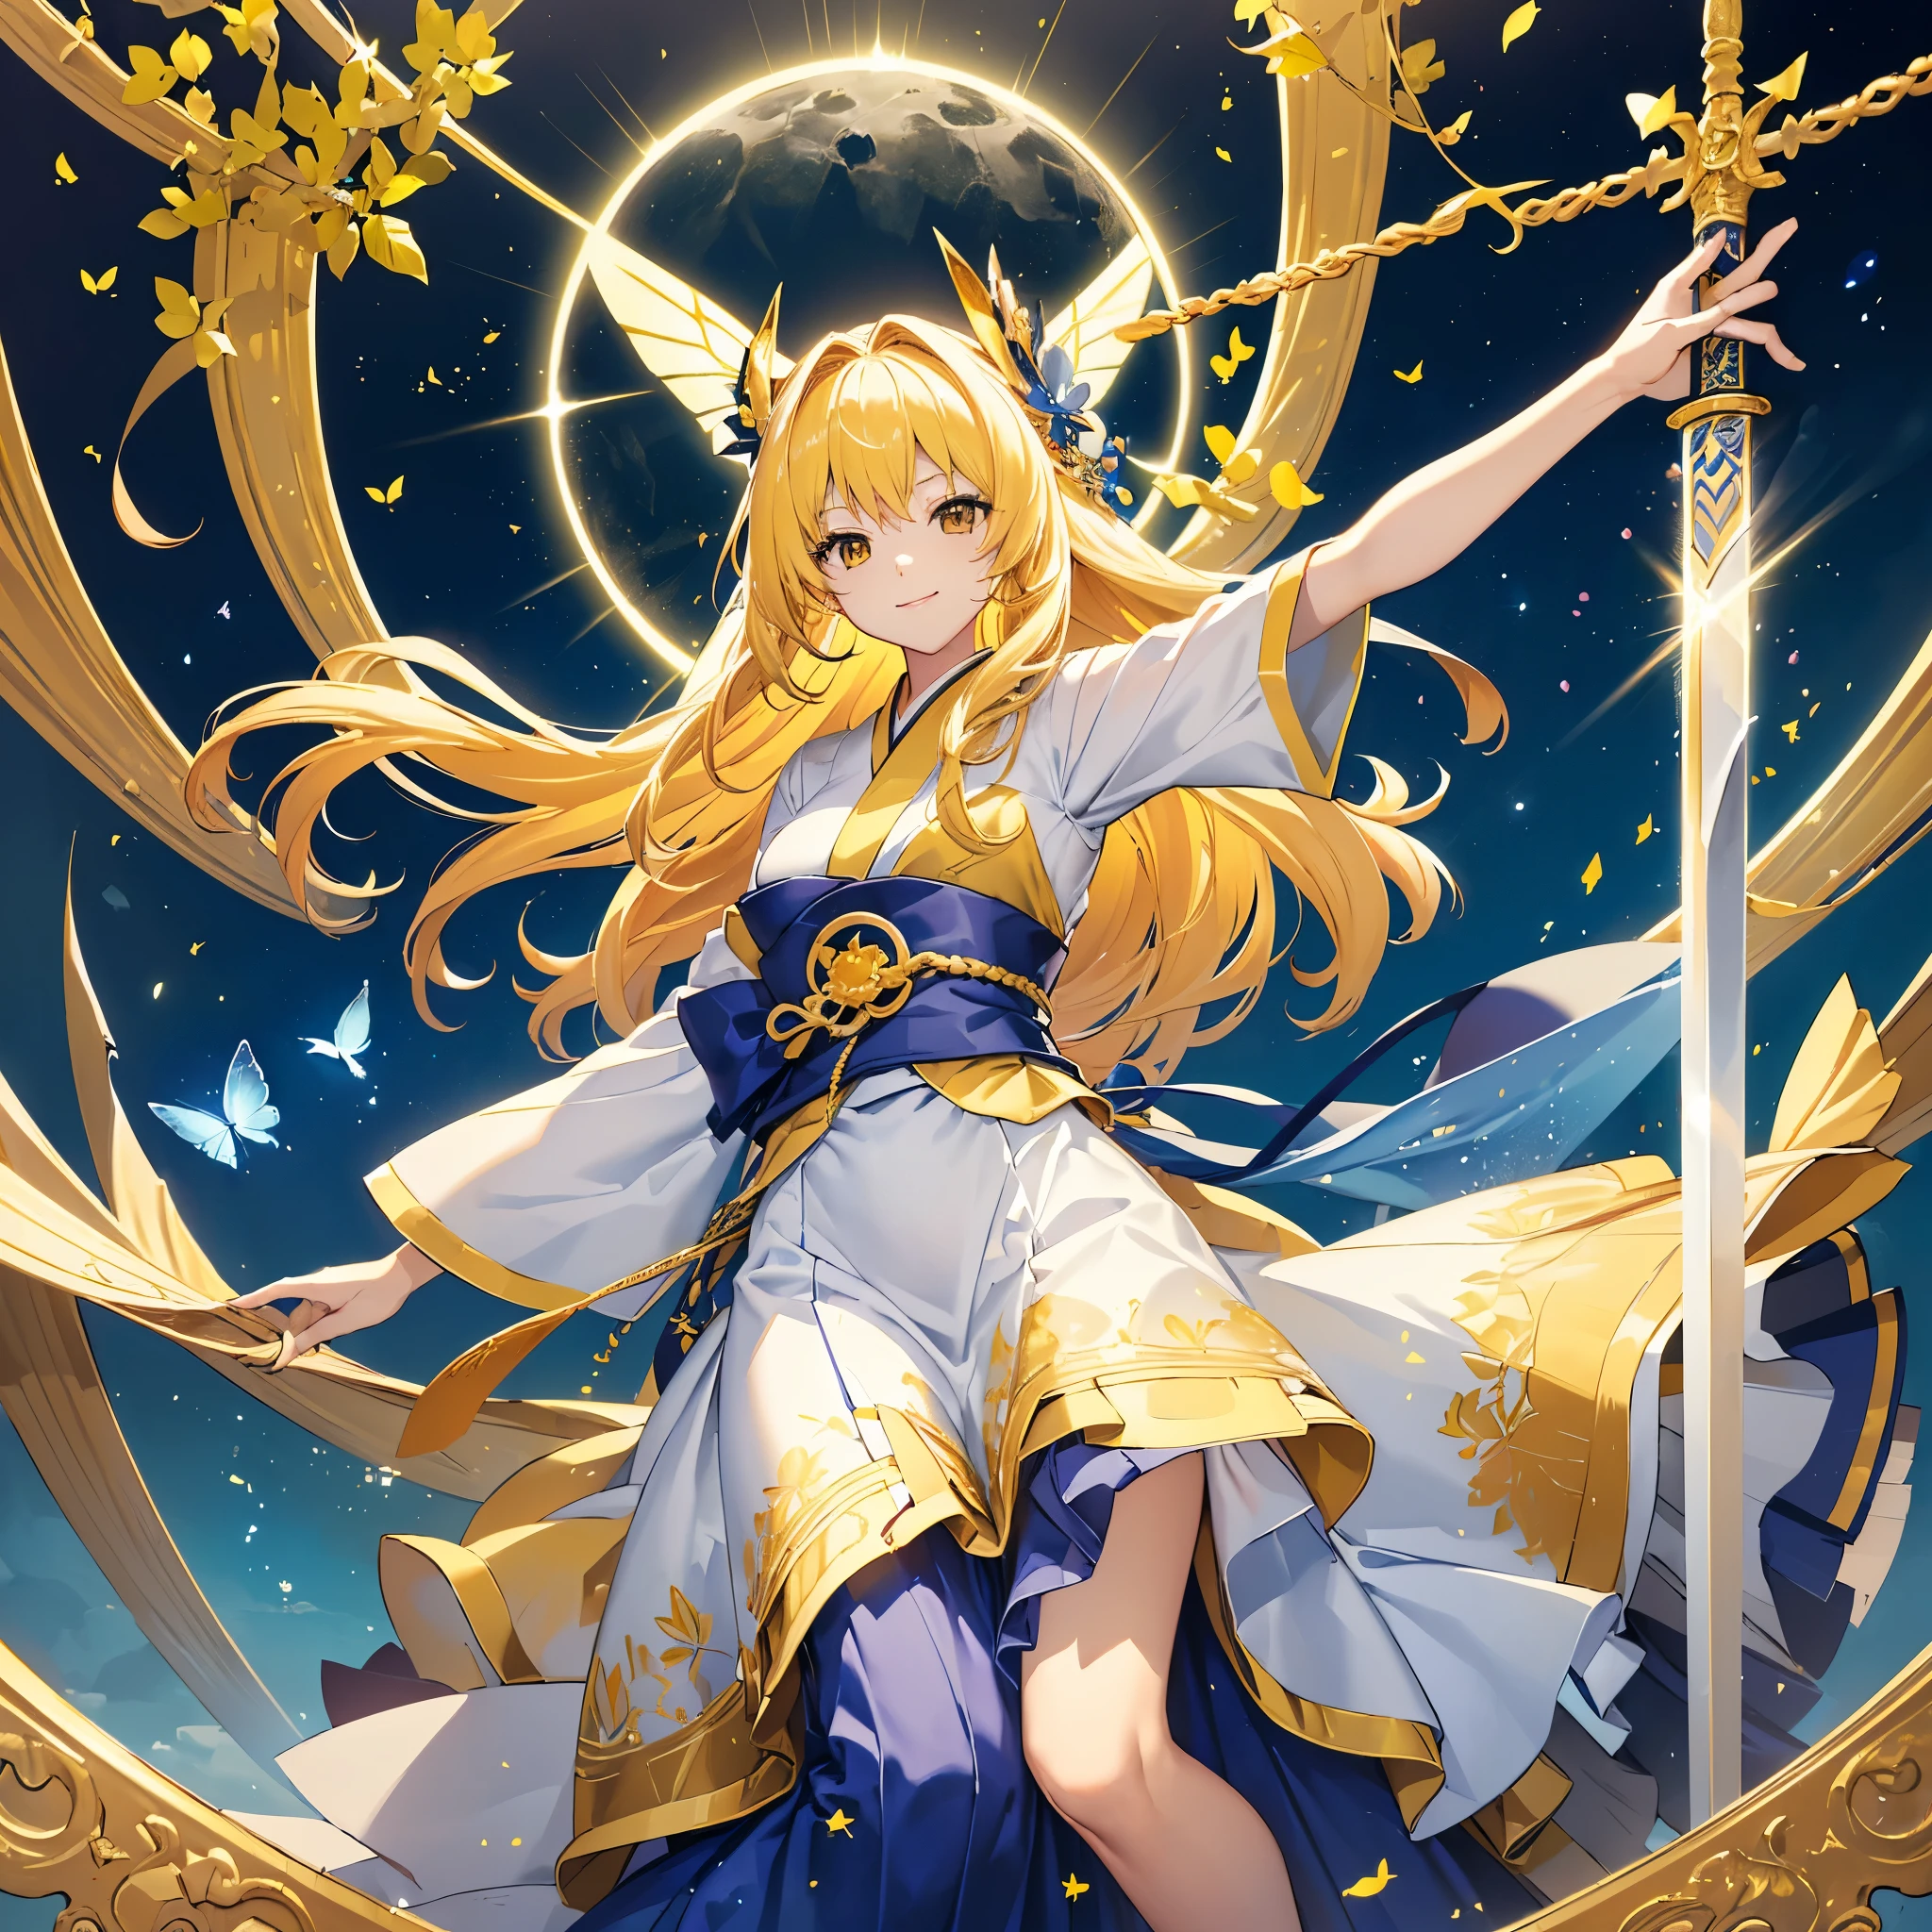 ((high resolution　Yellow Hair　Long Hair　Goddess of victory　one person　Lonely　smile))　((Blue Butterfly　night　Japanese style　old　Shining Aura　rainbow))　(Dance　Blade of Light　Shining Holy Sword　Swing down　Slashing)　moon　star　Draw your sword　Slashing　Catch the wind　fall